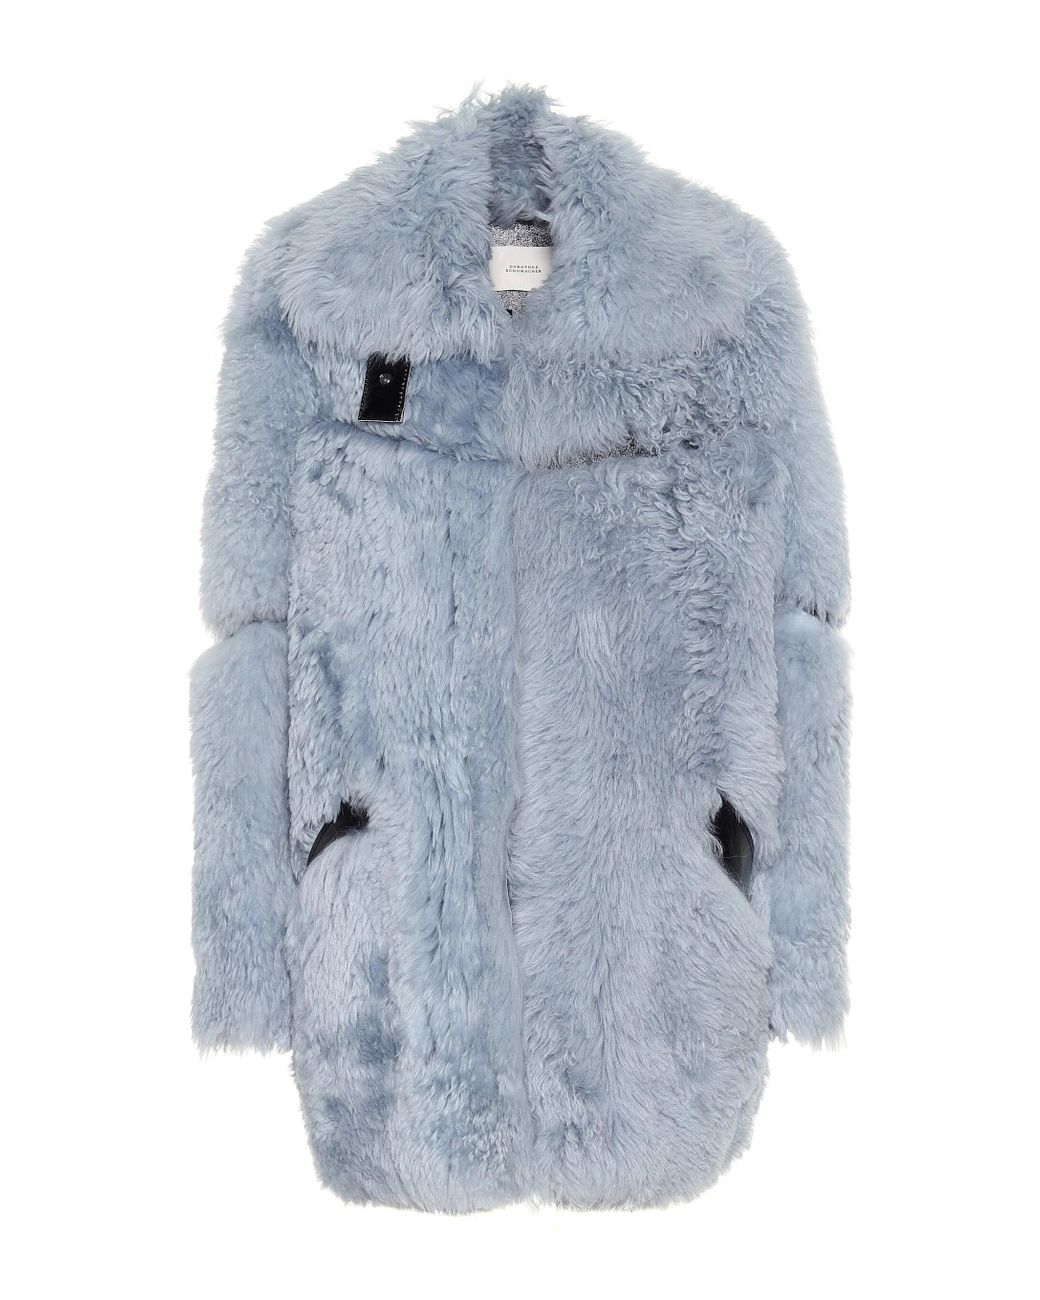 Dorothee Schumacher Reversible Shearling Leather Jacket in Blue - Lyst